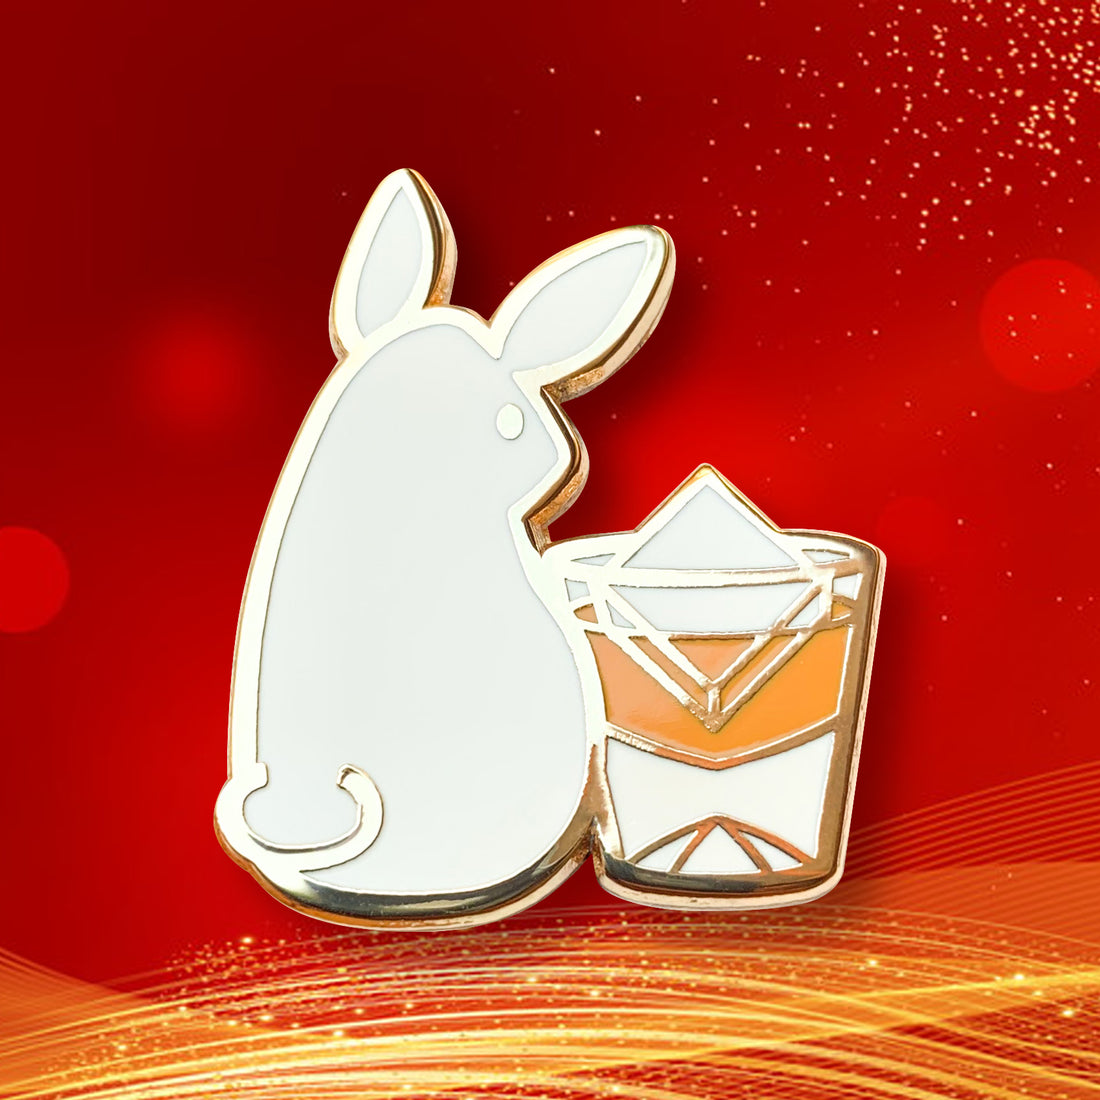 Bouncing into the New Year: Chinese New Year 2023 and the Sign of the Rabbit